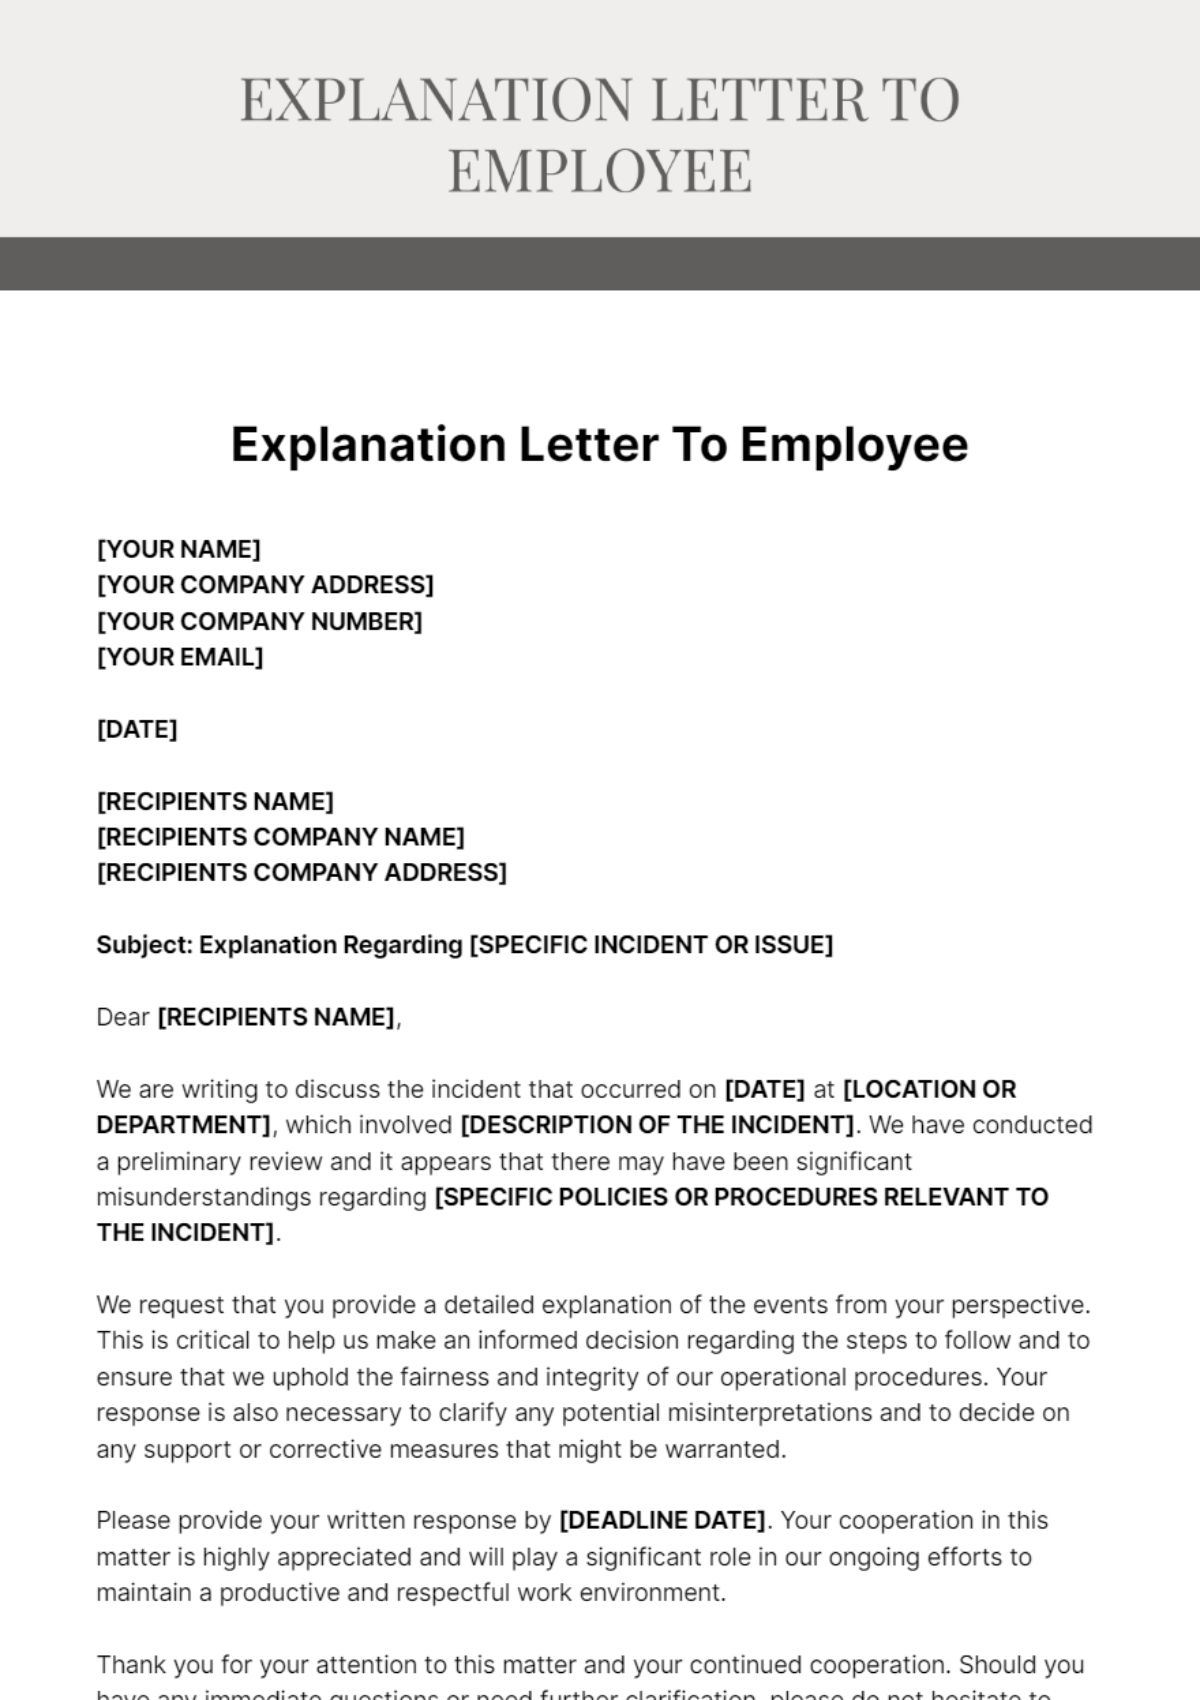 Explanation Letter To Employee Template